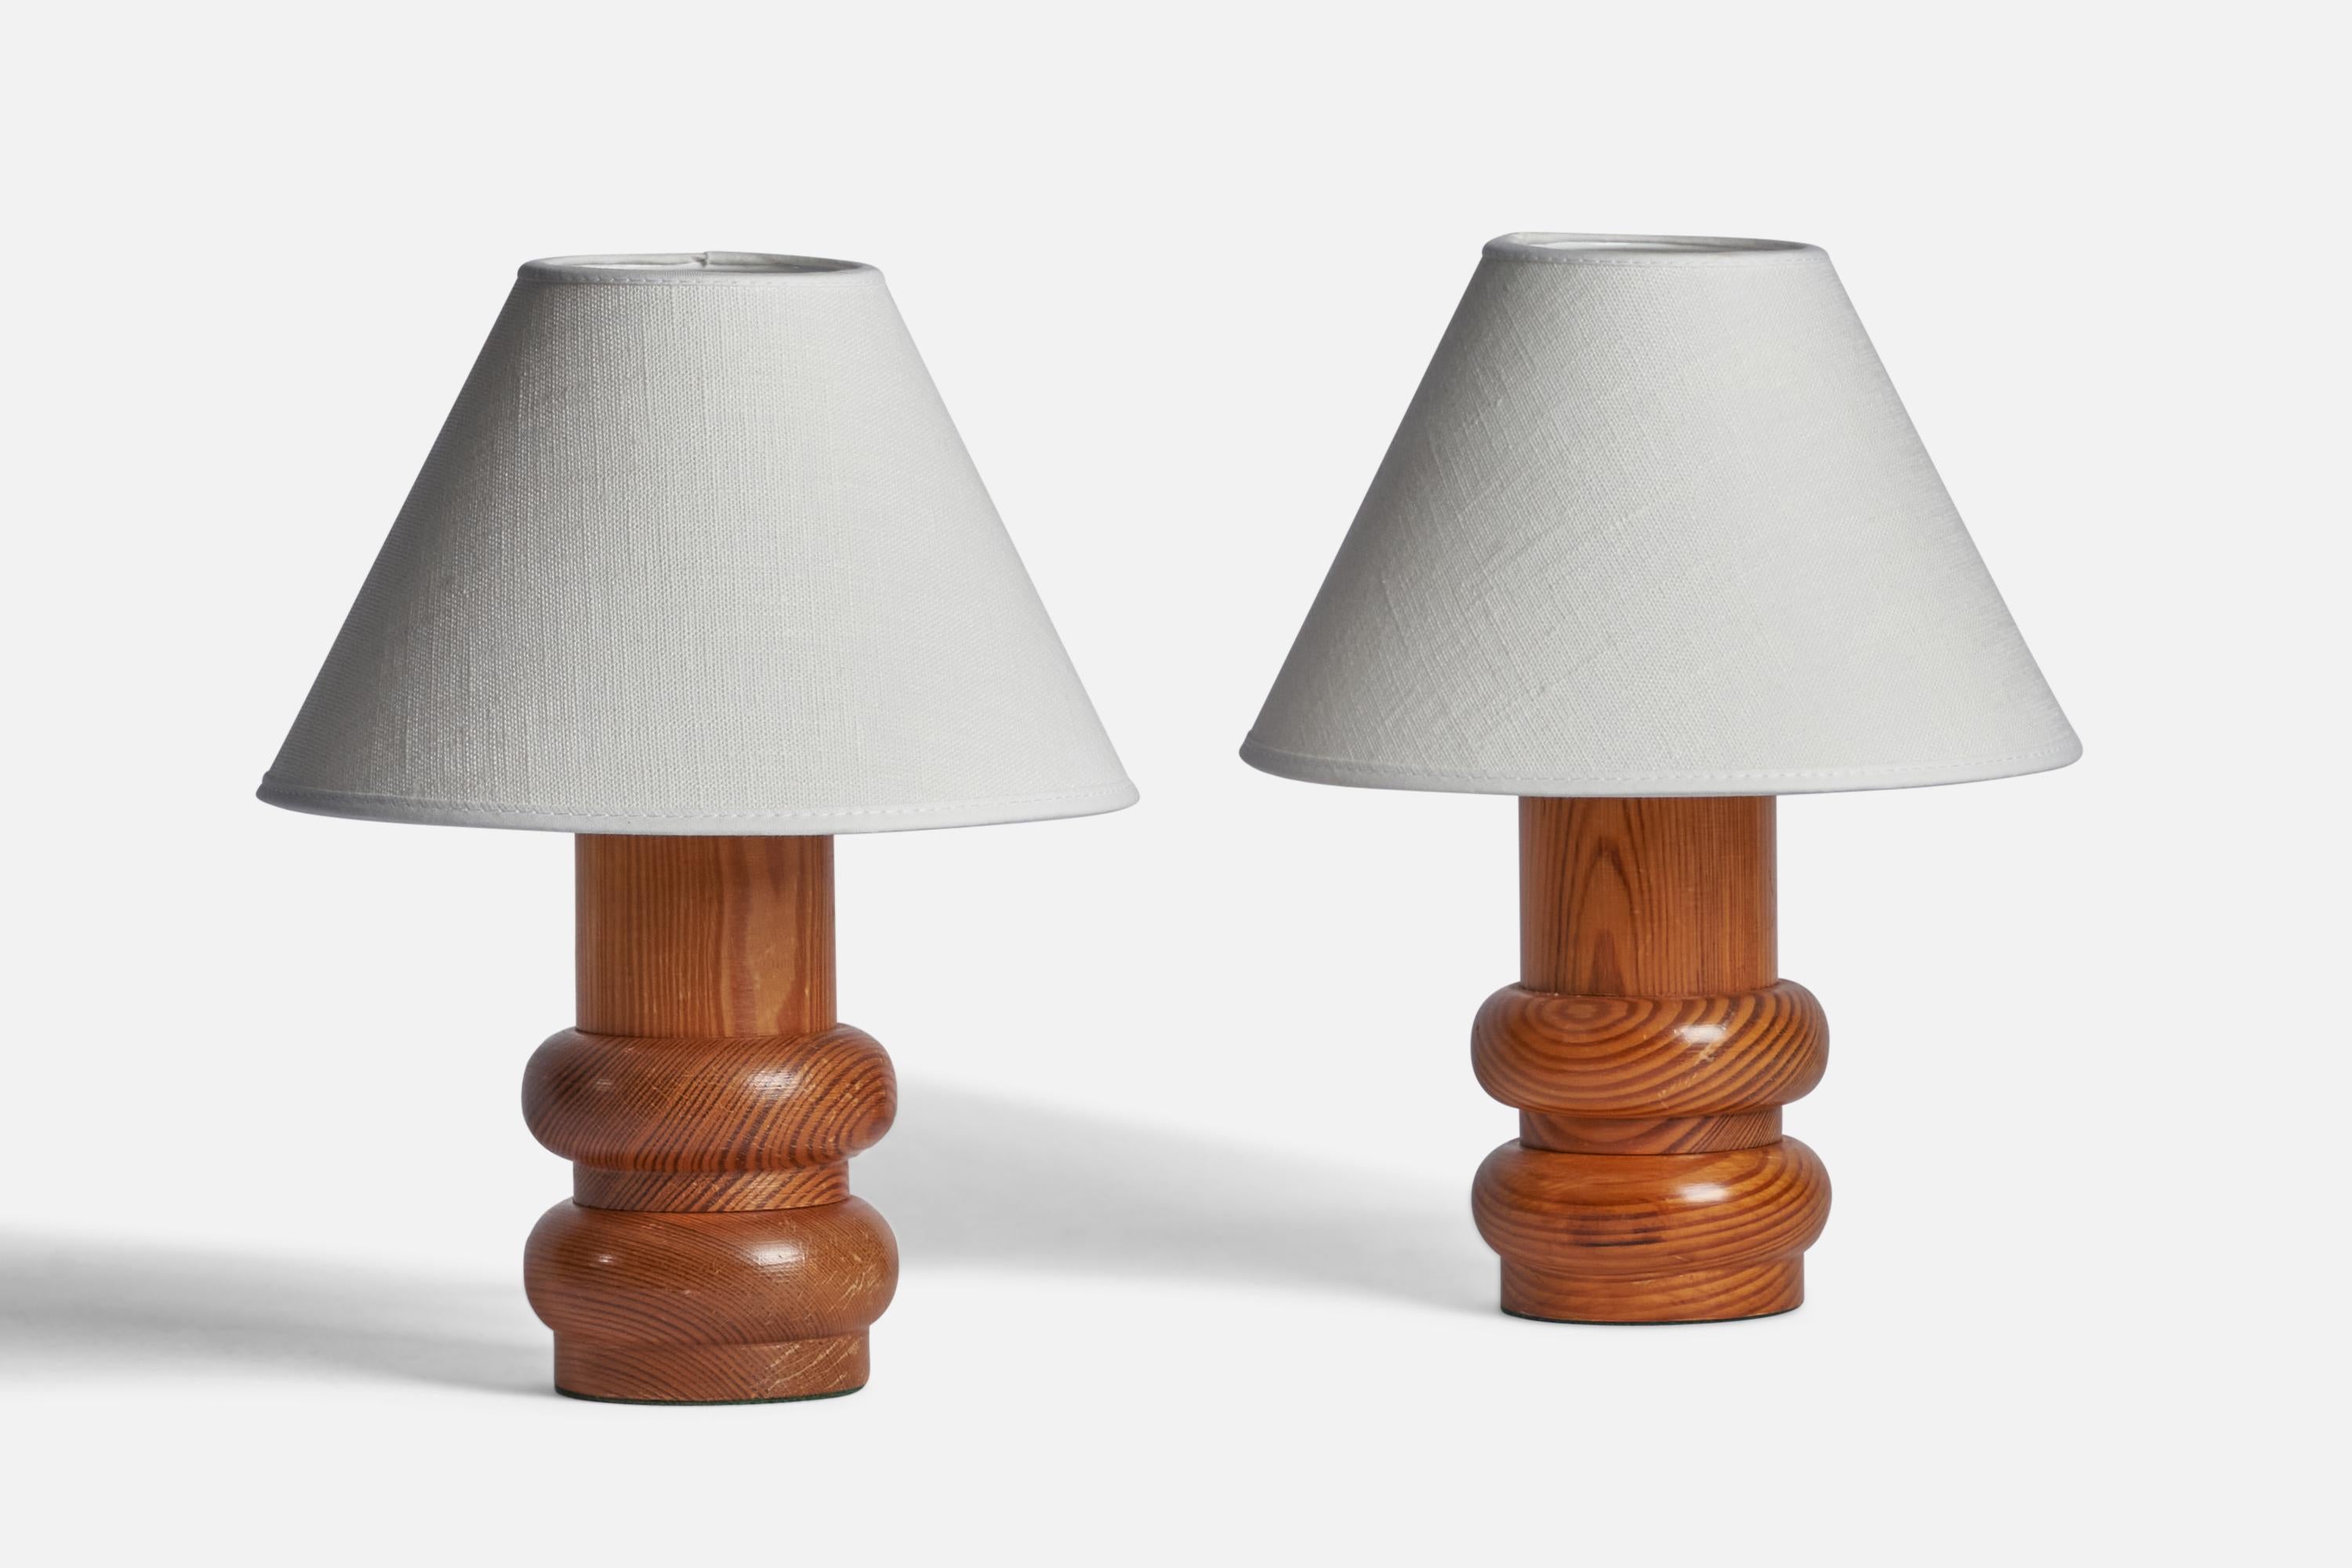 A pair of pine table lamp designed and produced in Sweden, 1970s.

Dimensions of Lamp (inches): 7.5” H x 3.5” Diameter
Dimensions of Shade (inches): 3” Top Diameter x 8” Bottom Diameter x 5.4” H
Dimensions of Lamp with Shade (inches): 12” H x 8”